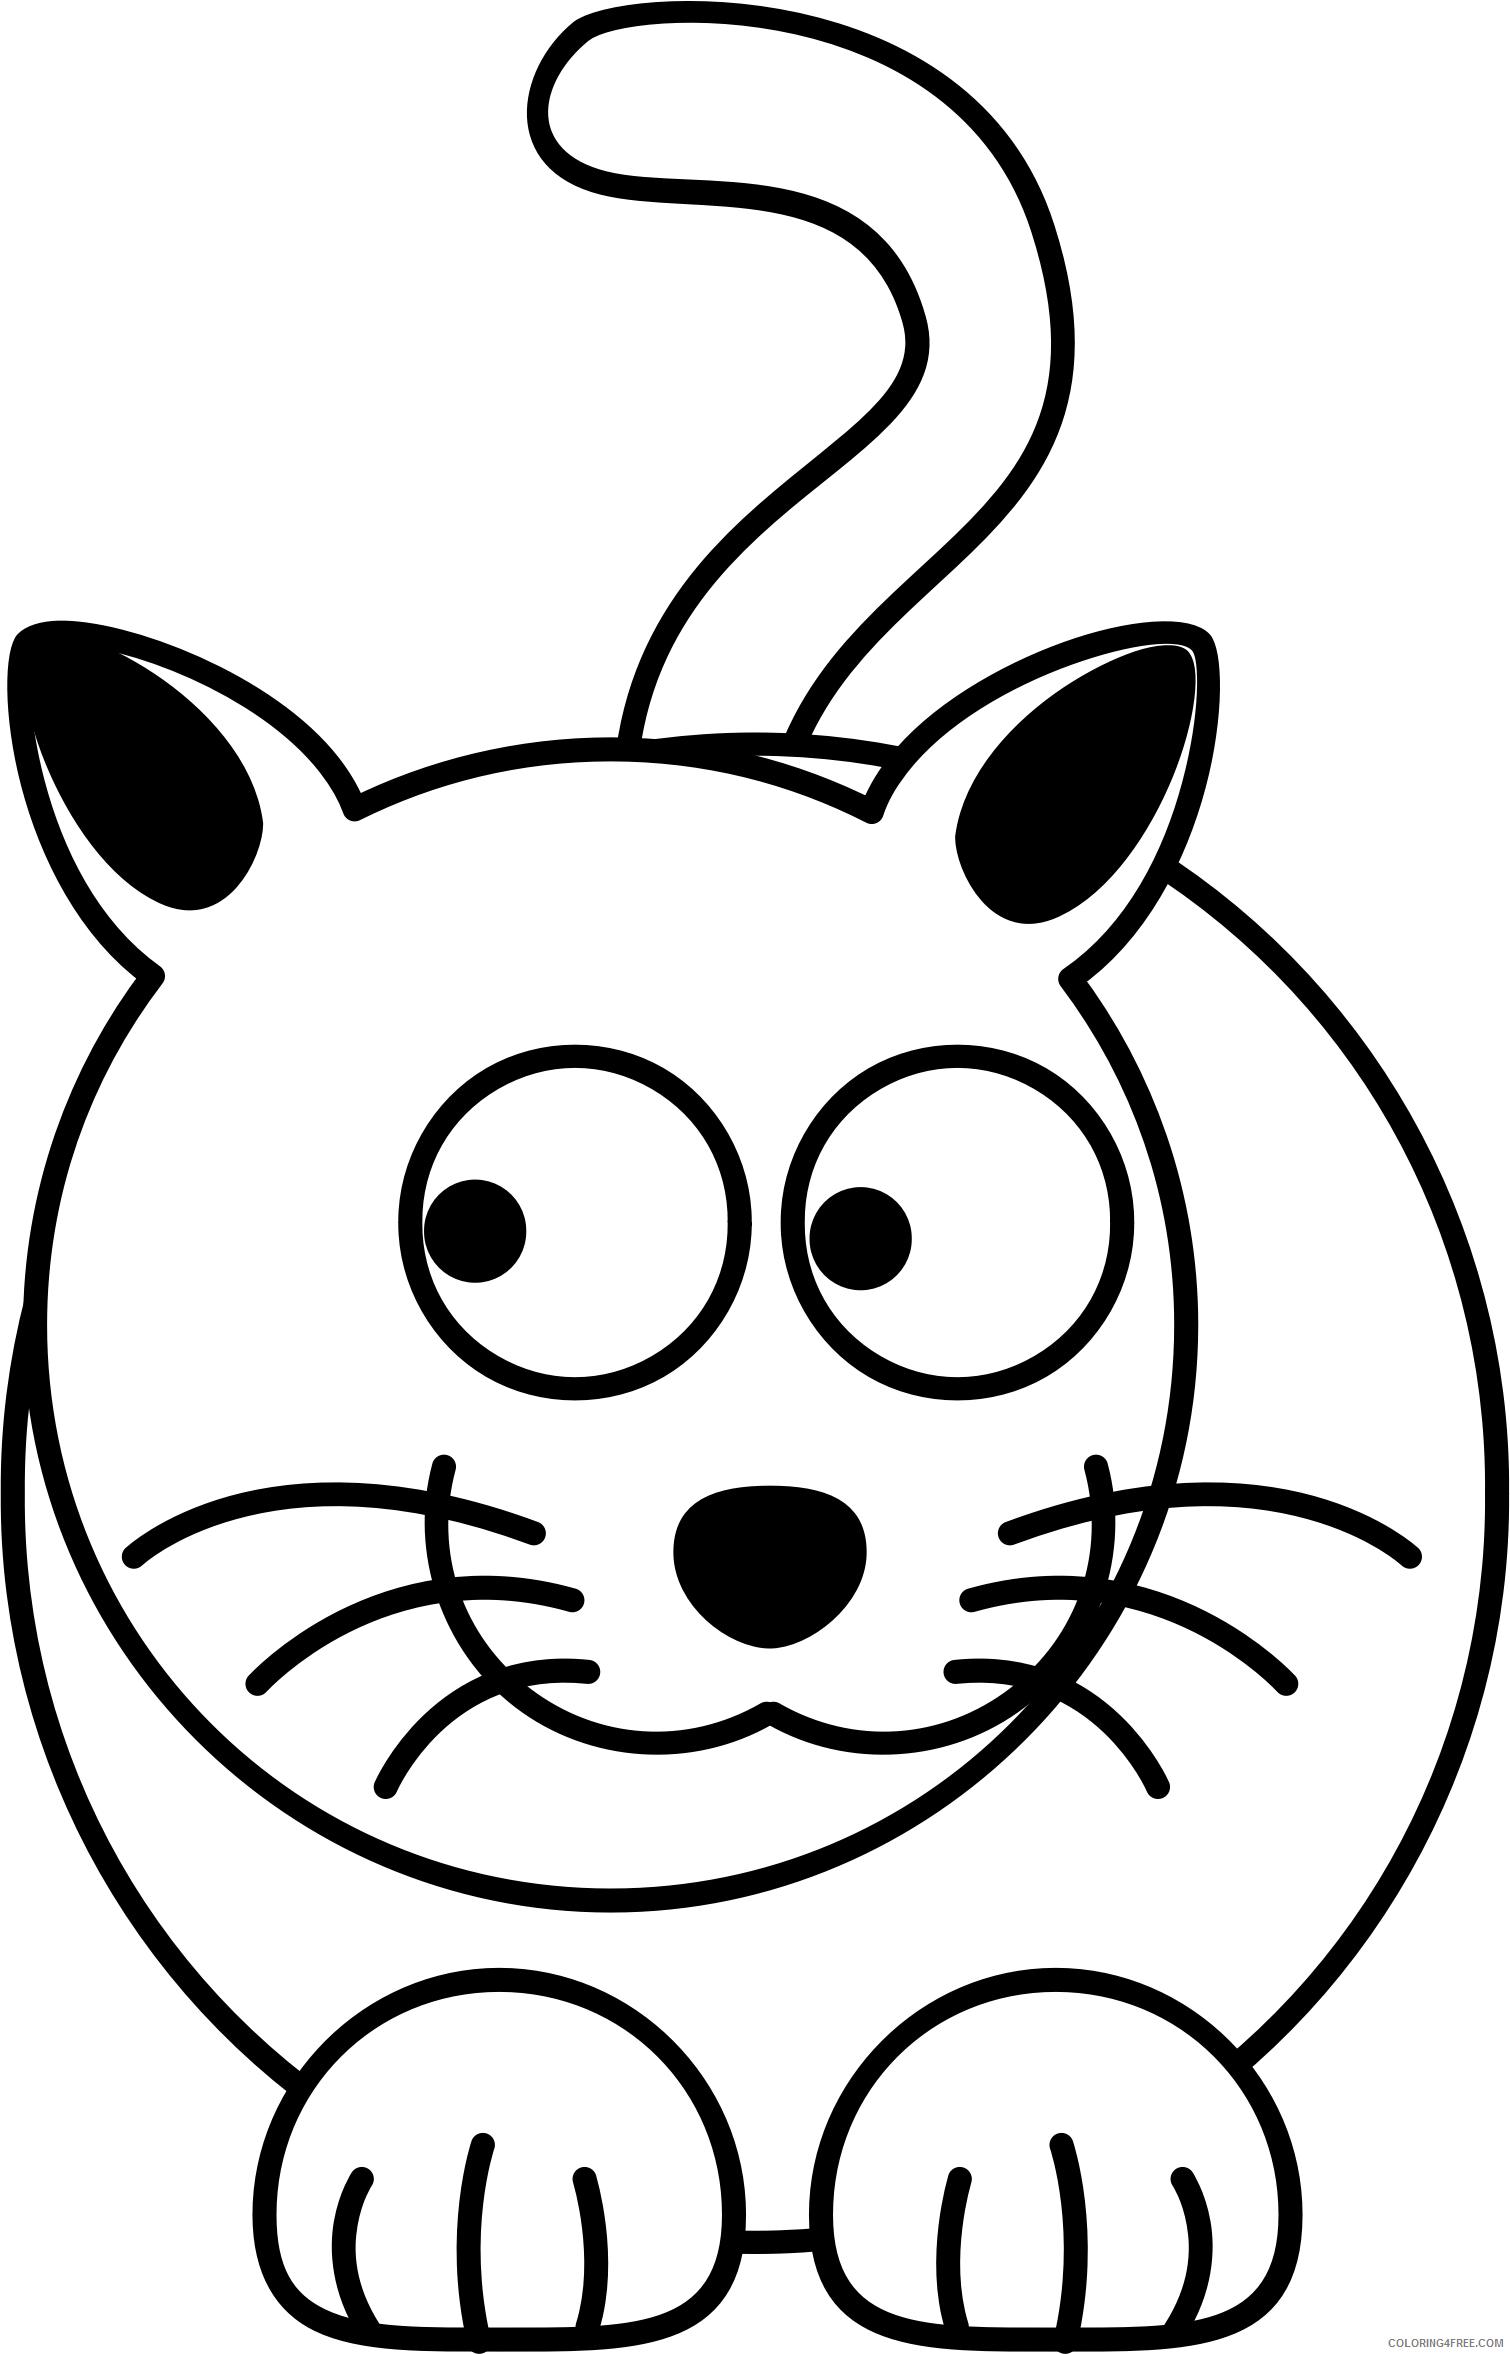 Kitty Cat Coloring Pages kitty cat 4 bpng Printable Coloring4free